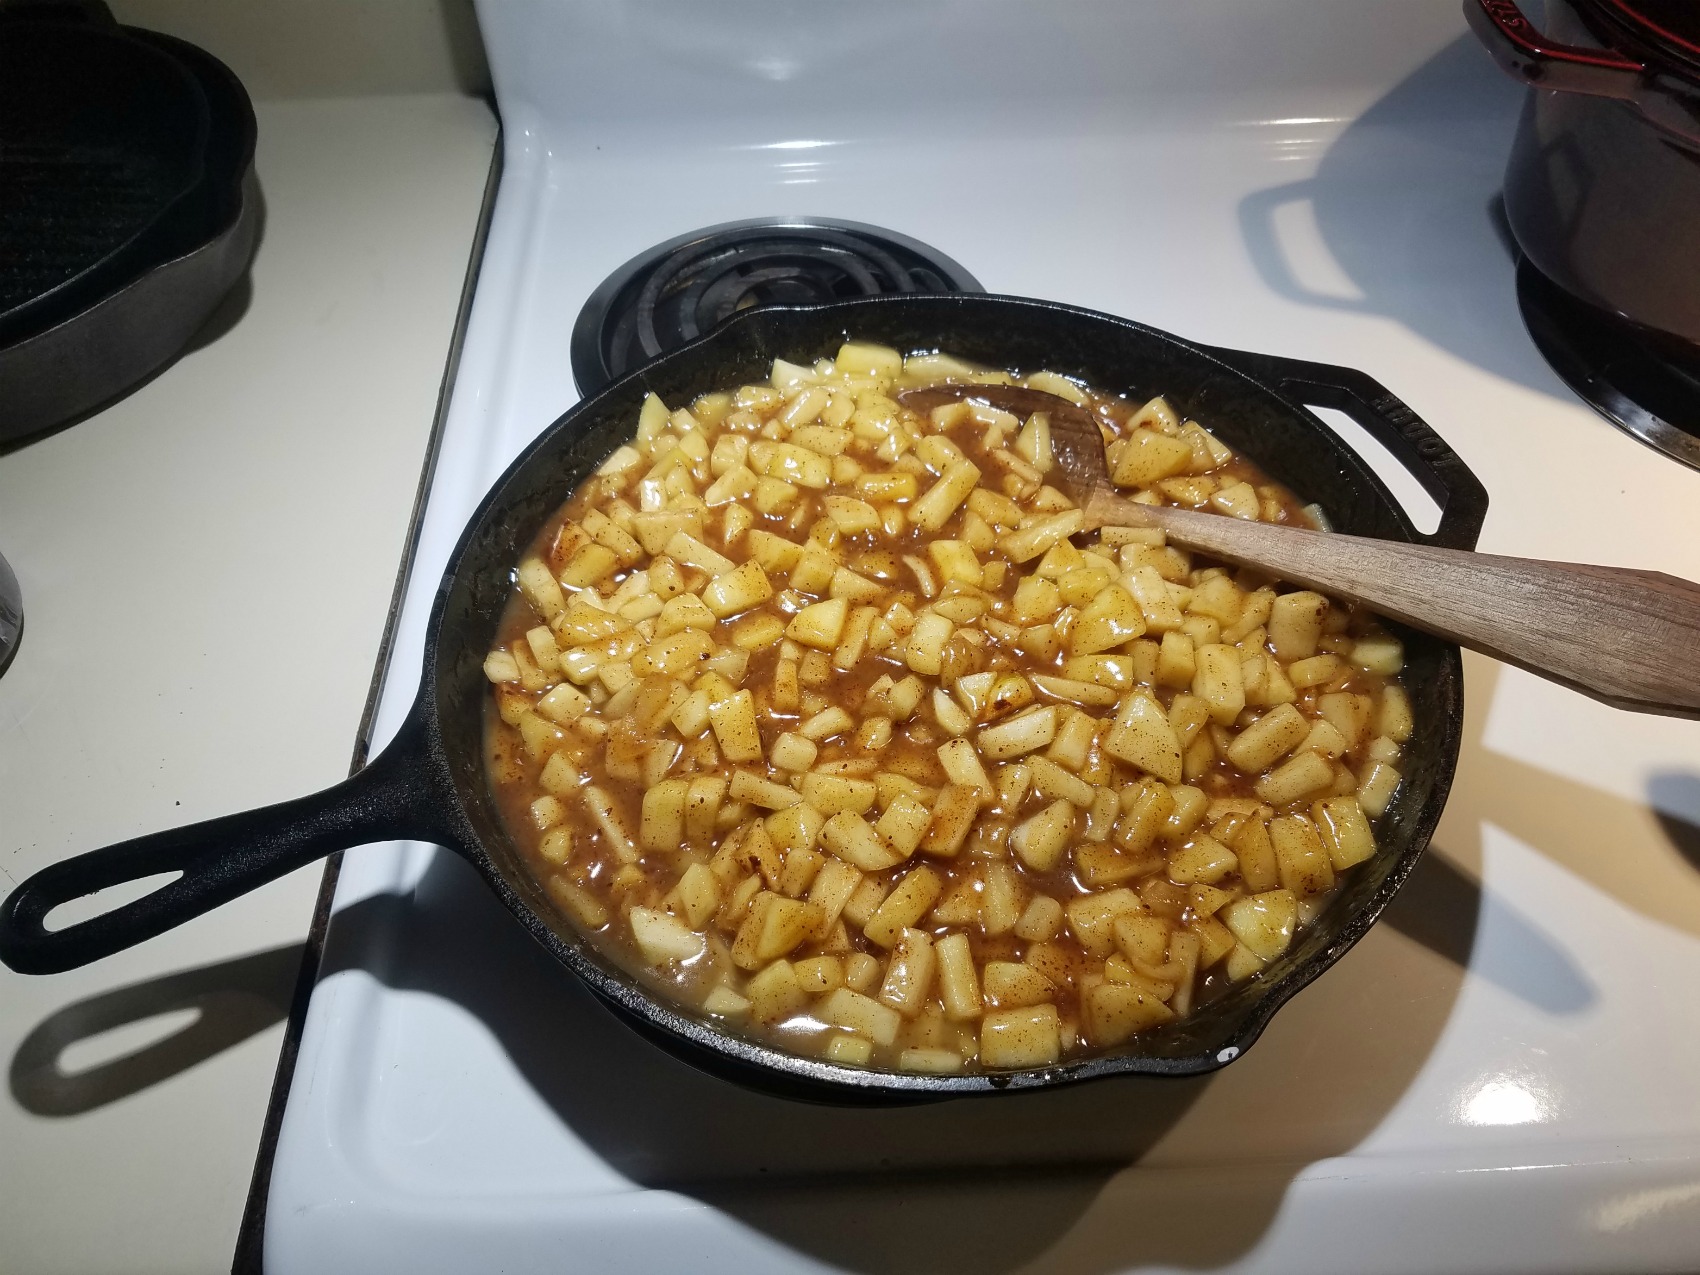 Apple pie filling cooking in a cast iron skillet on white kitchen stove.